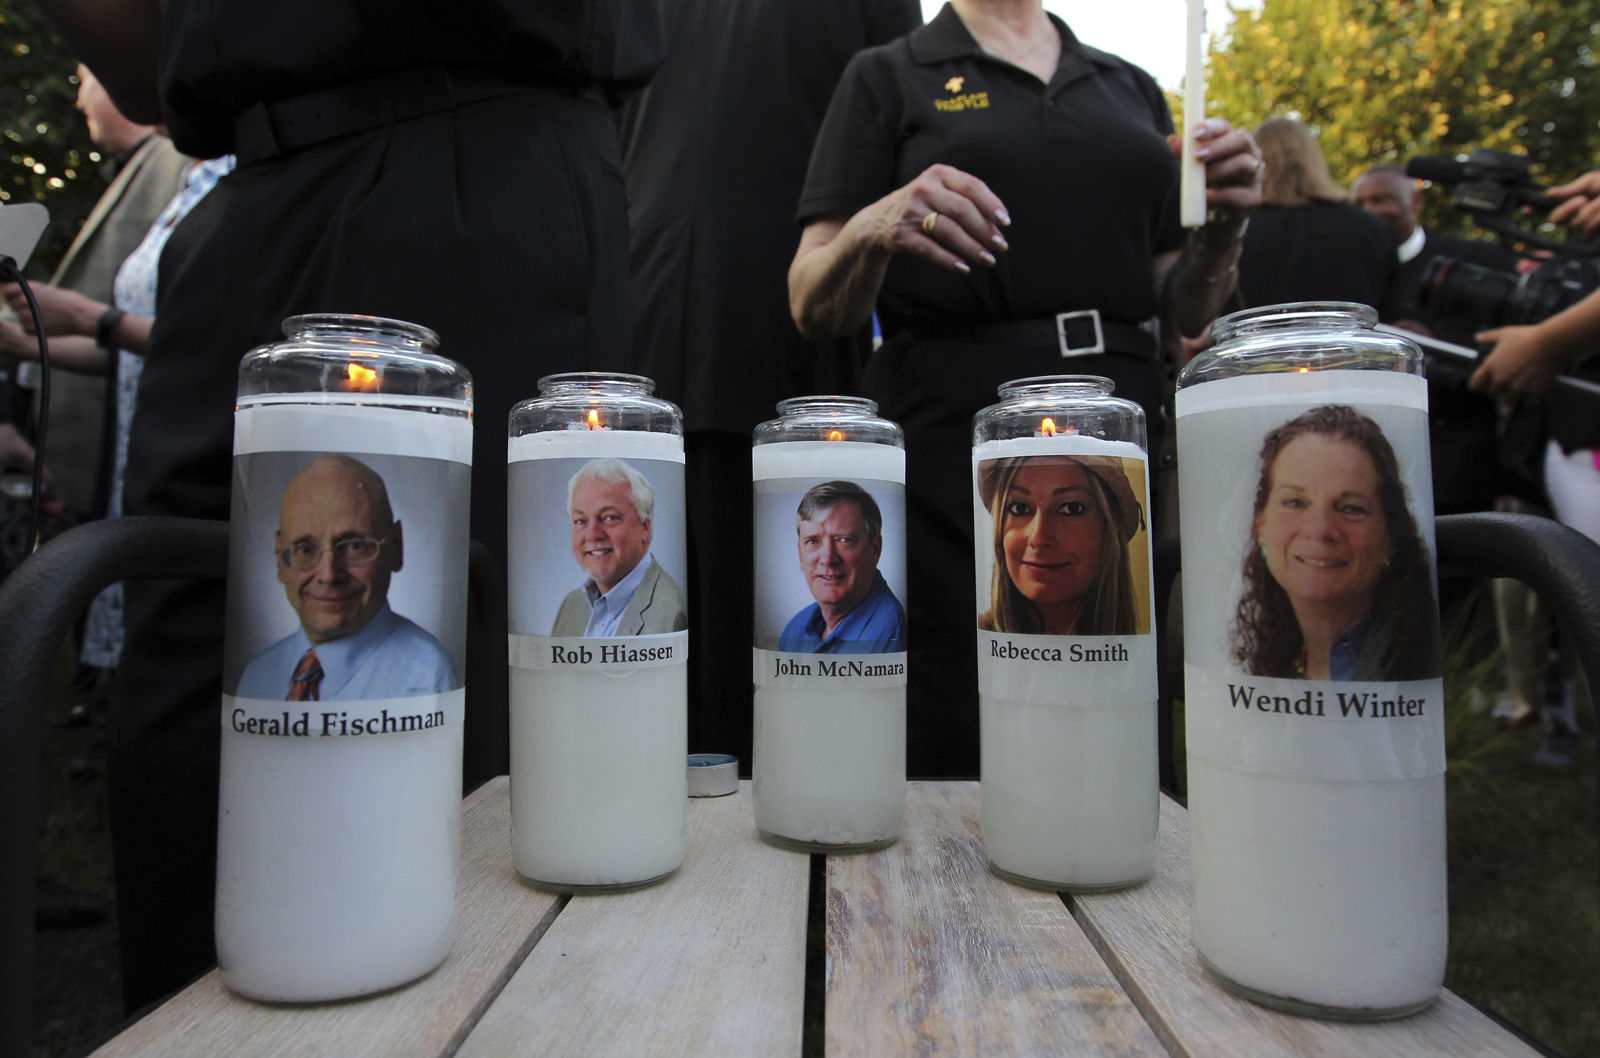 Photos of five journalists adorn candles during a vigil across the street from where they  were slain in their newsroom in Annapolis, Md., Friday, June 29, 2018. Prosecutors say Jarrod W. Ramos opened fire Thursday in the Capital Gazette newsroom. (AP Photo/Jose Luis Magana)